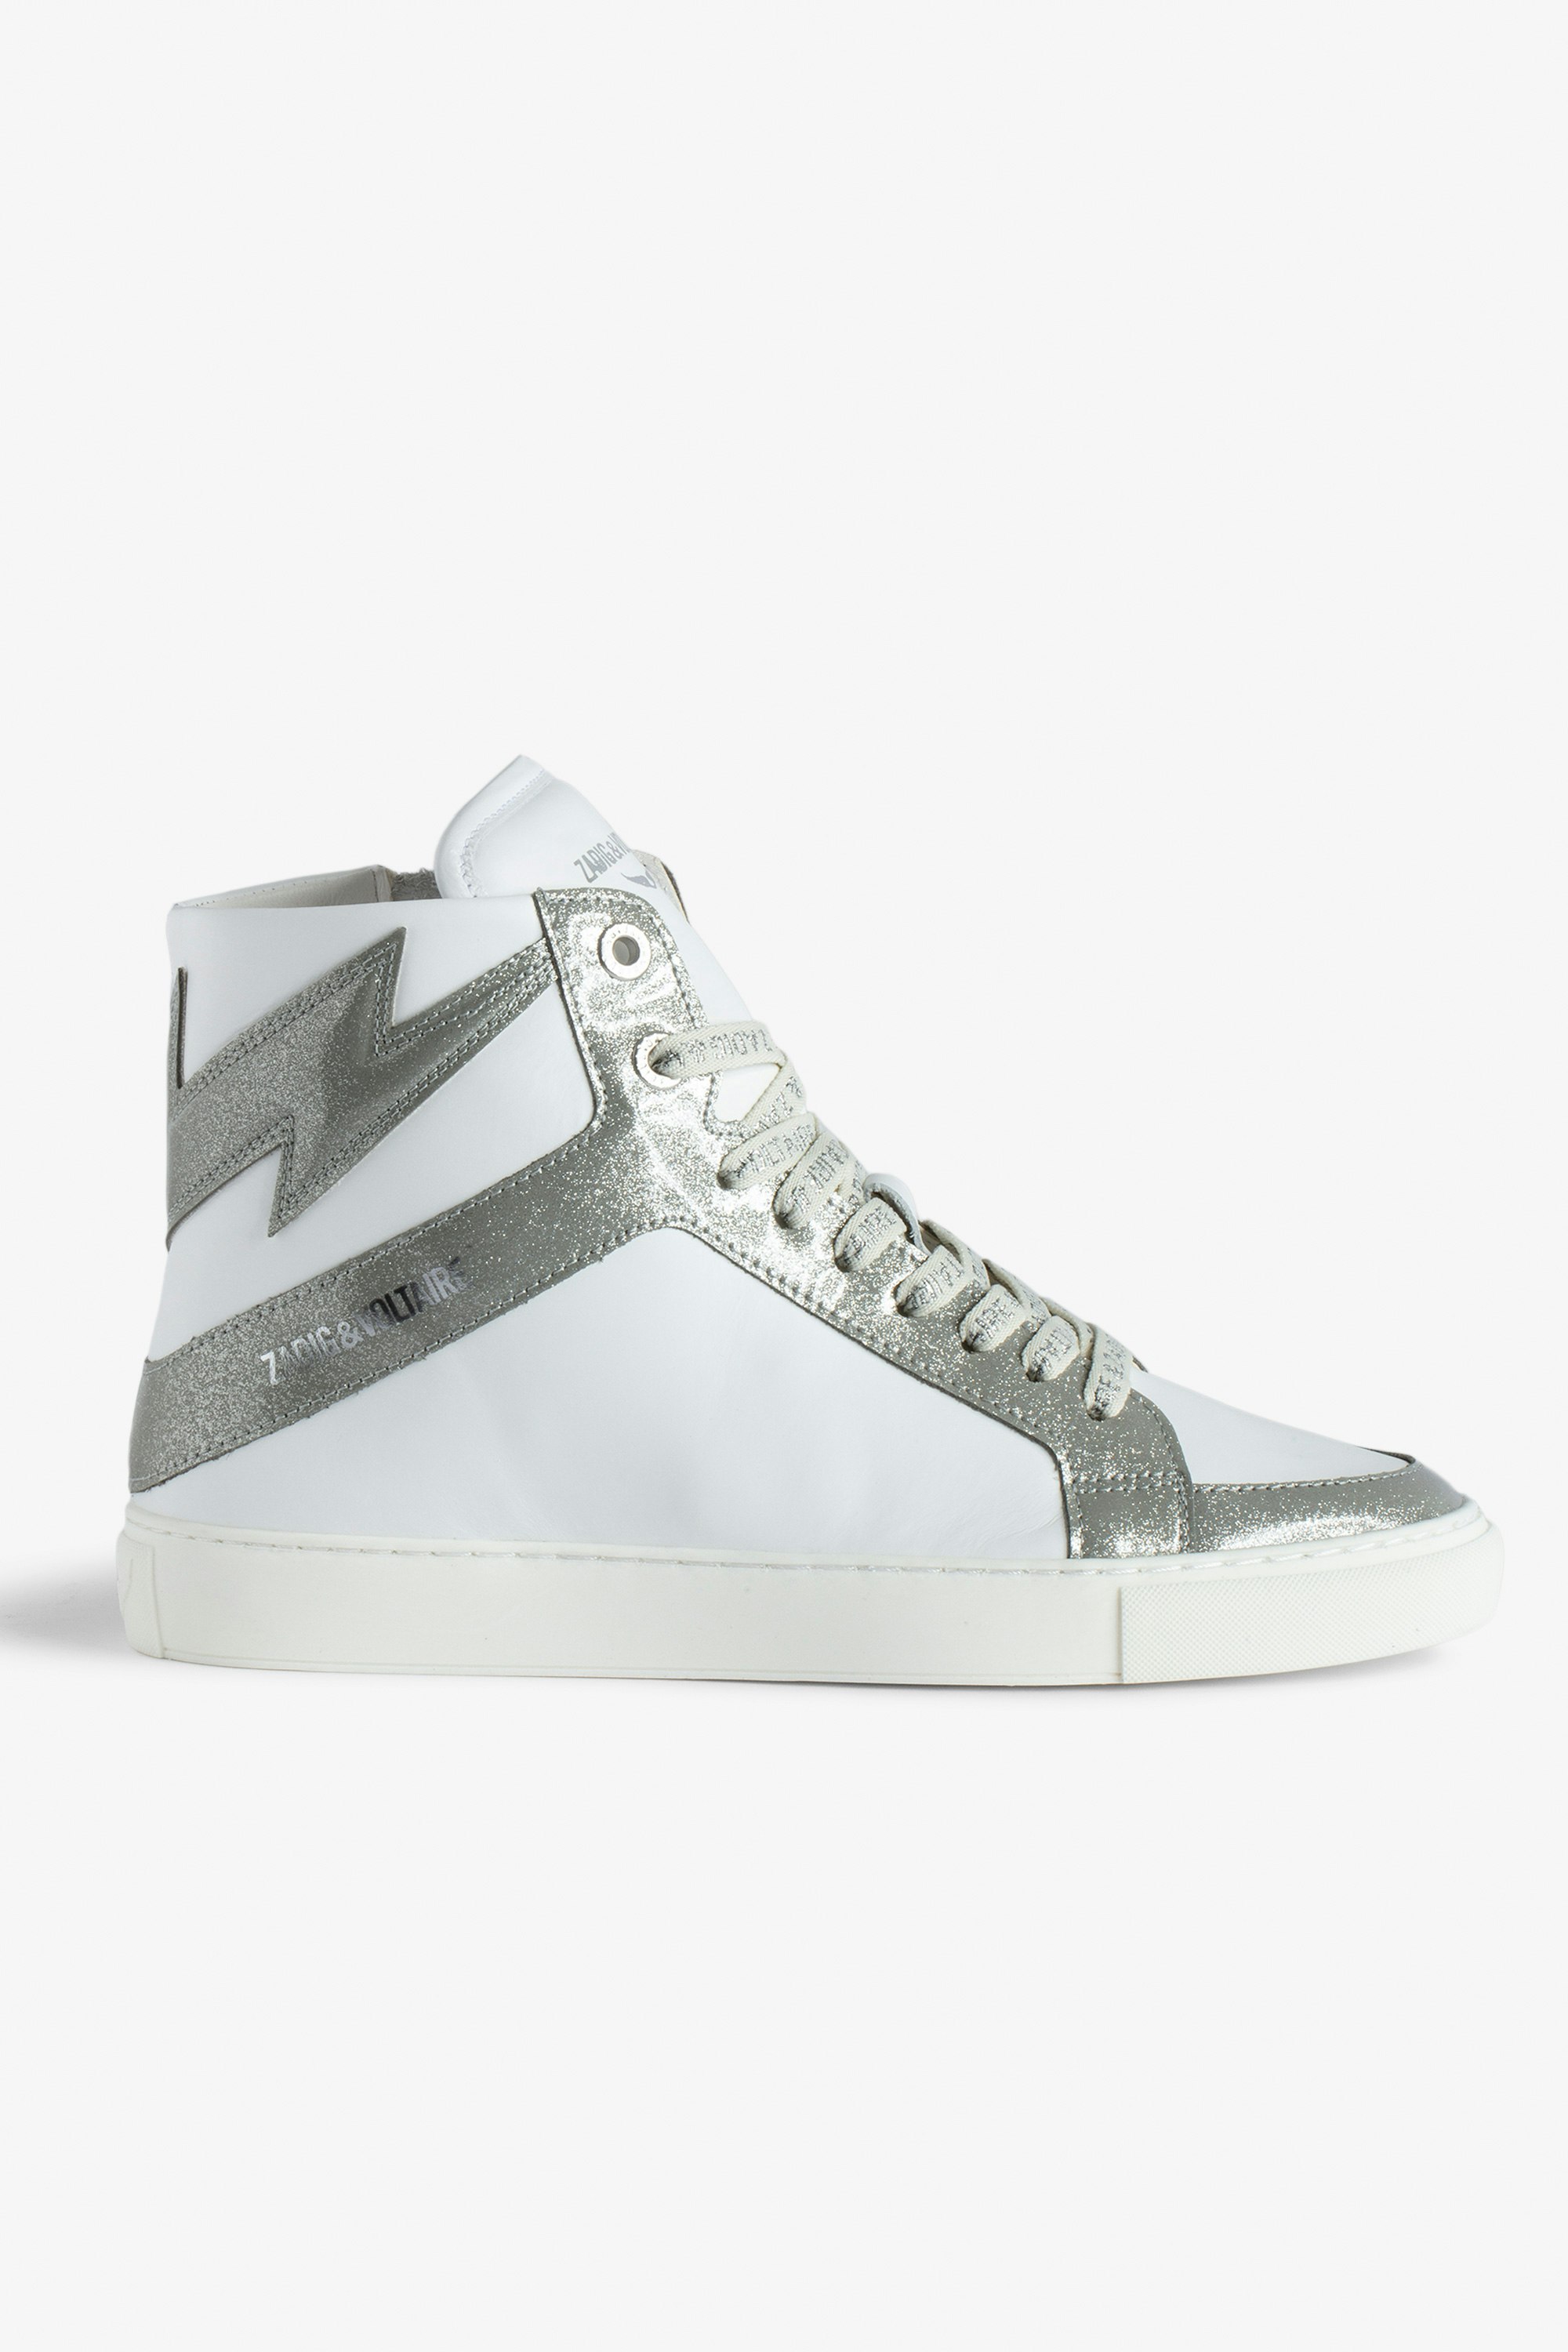 ZV1747 High Flash High-Top Trainers - Women’s smooth leather and silver glitter high-top trainers with lightning bolt panel.